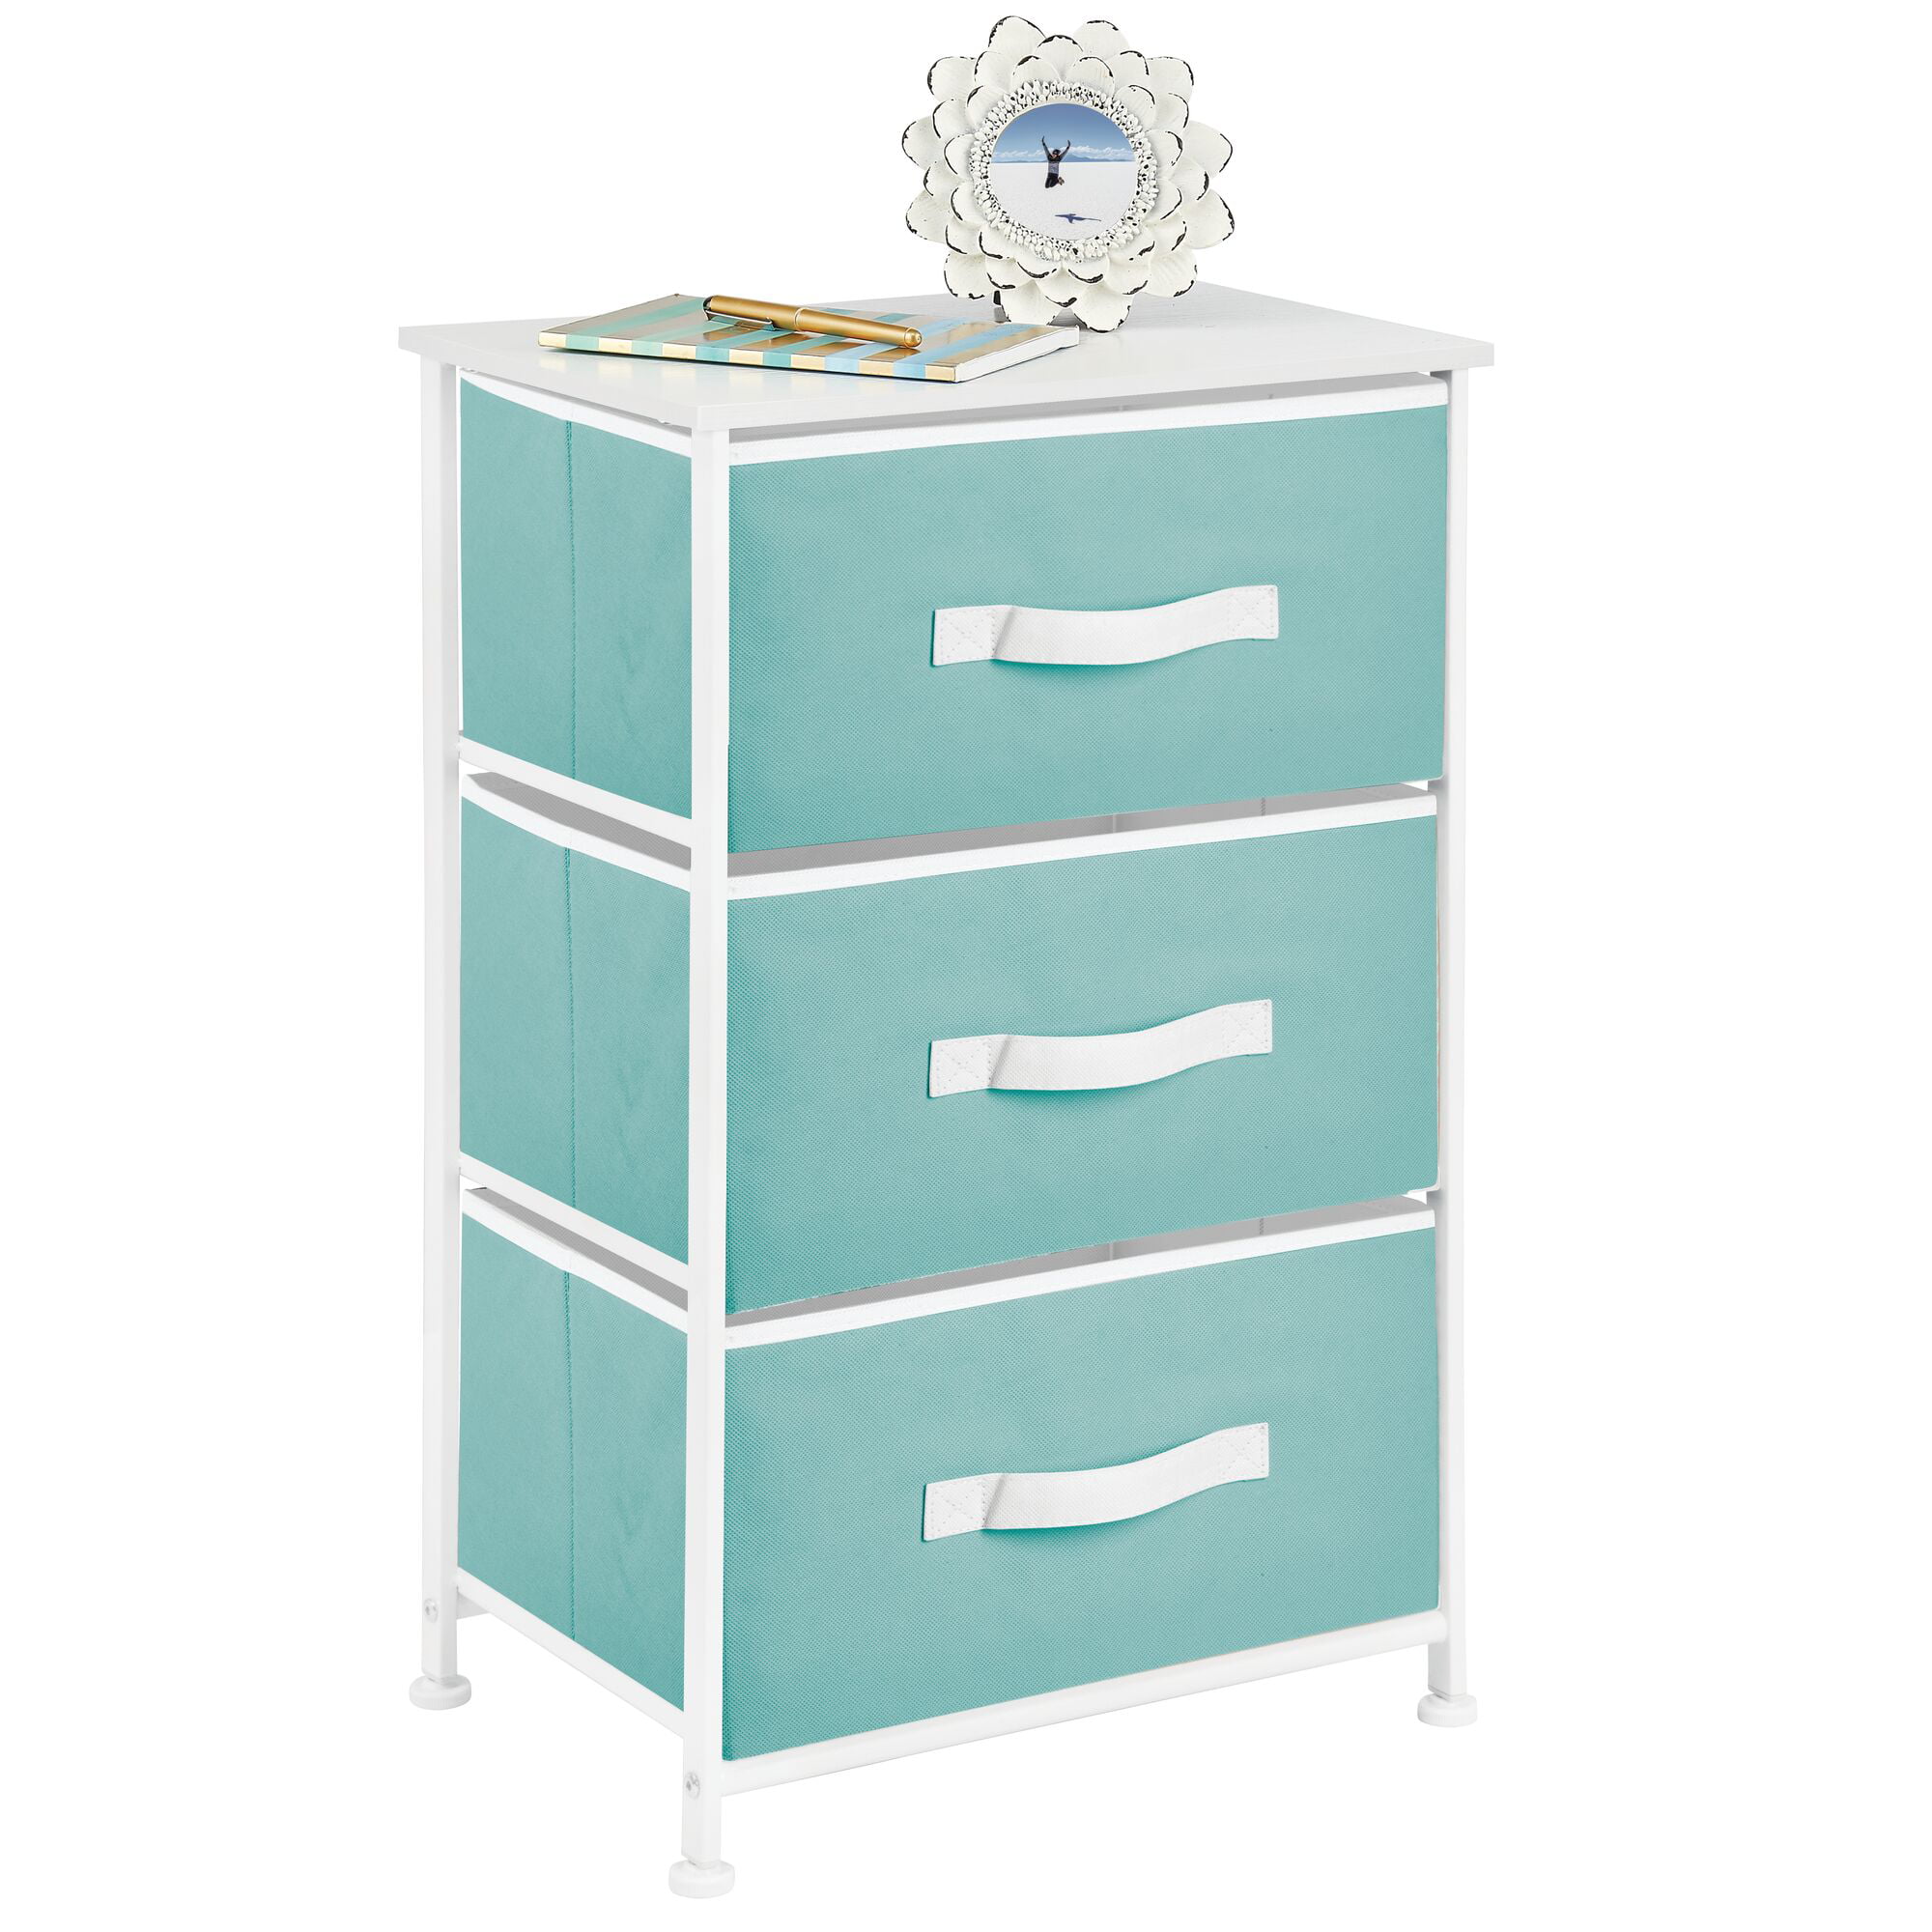 Sturdy Steel Frame Organizer Unit for Bedroom Closets Easy Pull Fabric Bins mDesign Tall Dresser Storage Chest Entryway 5 Drawers Hallway Mint Green/White Wood Top